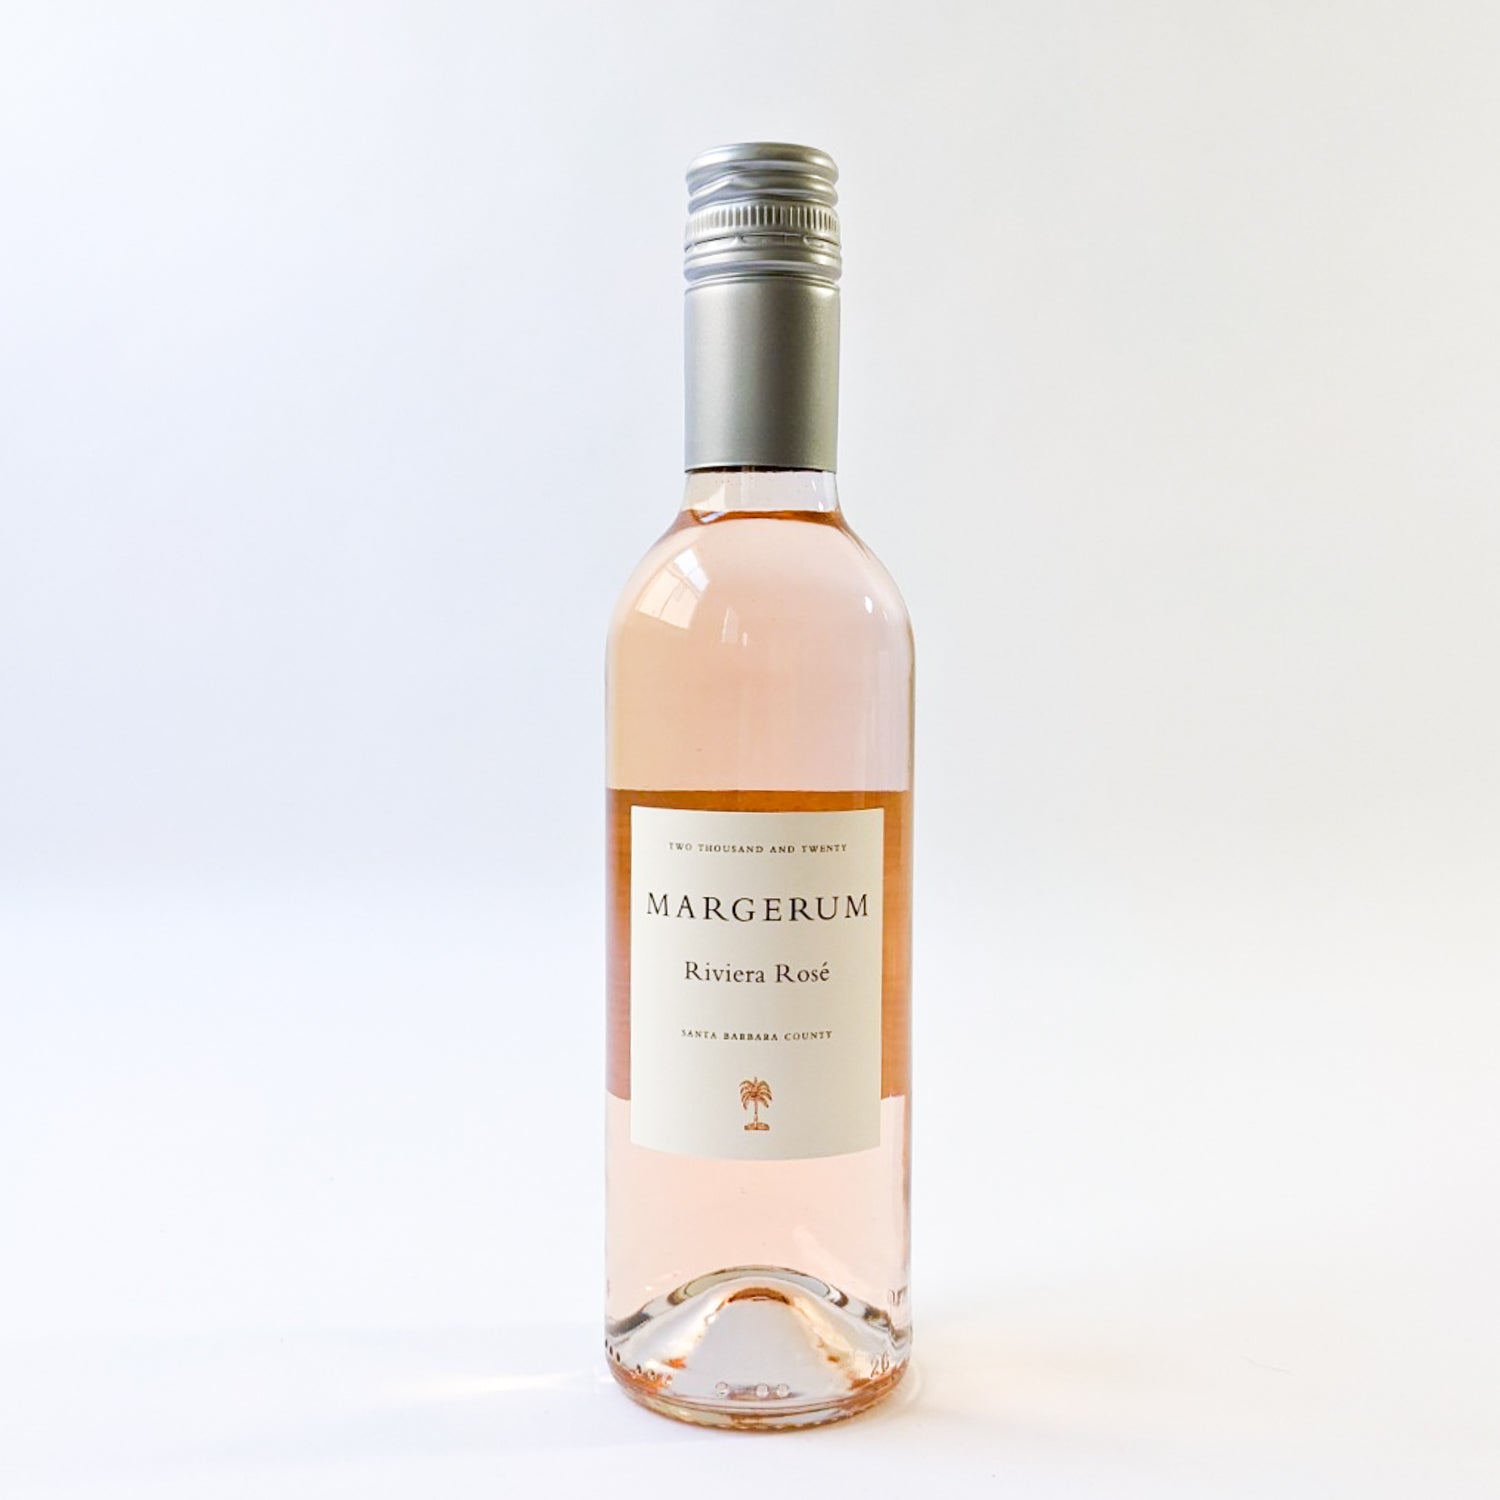 Small bottle of Margerum's Riviera Rosé against a white background